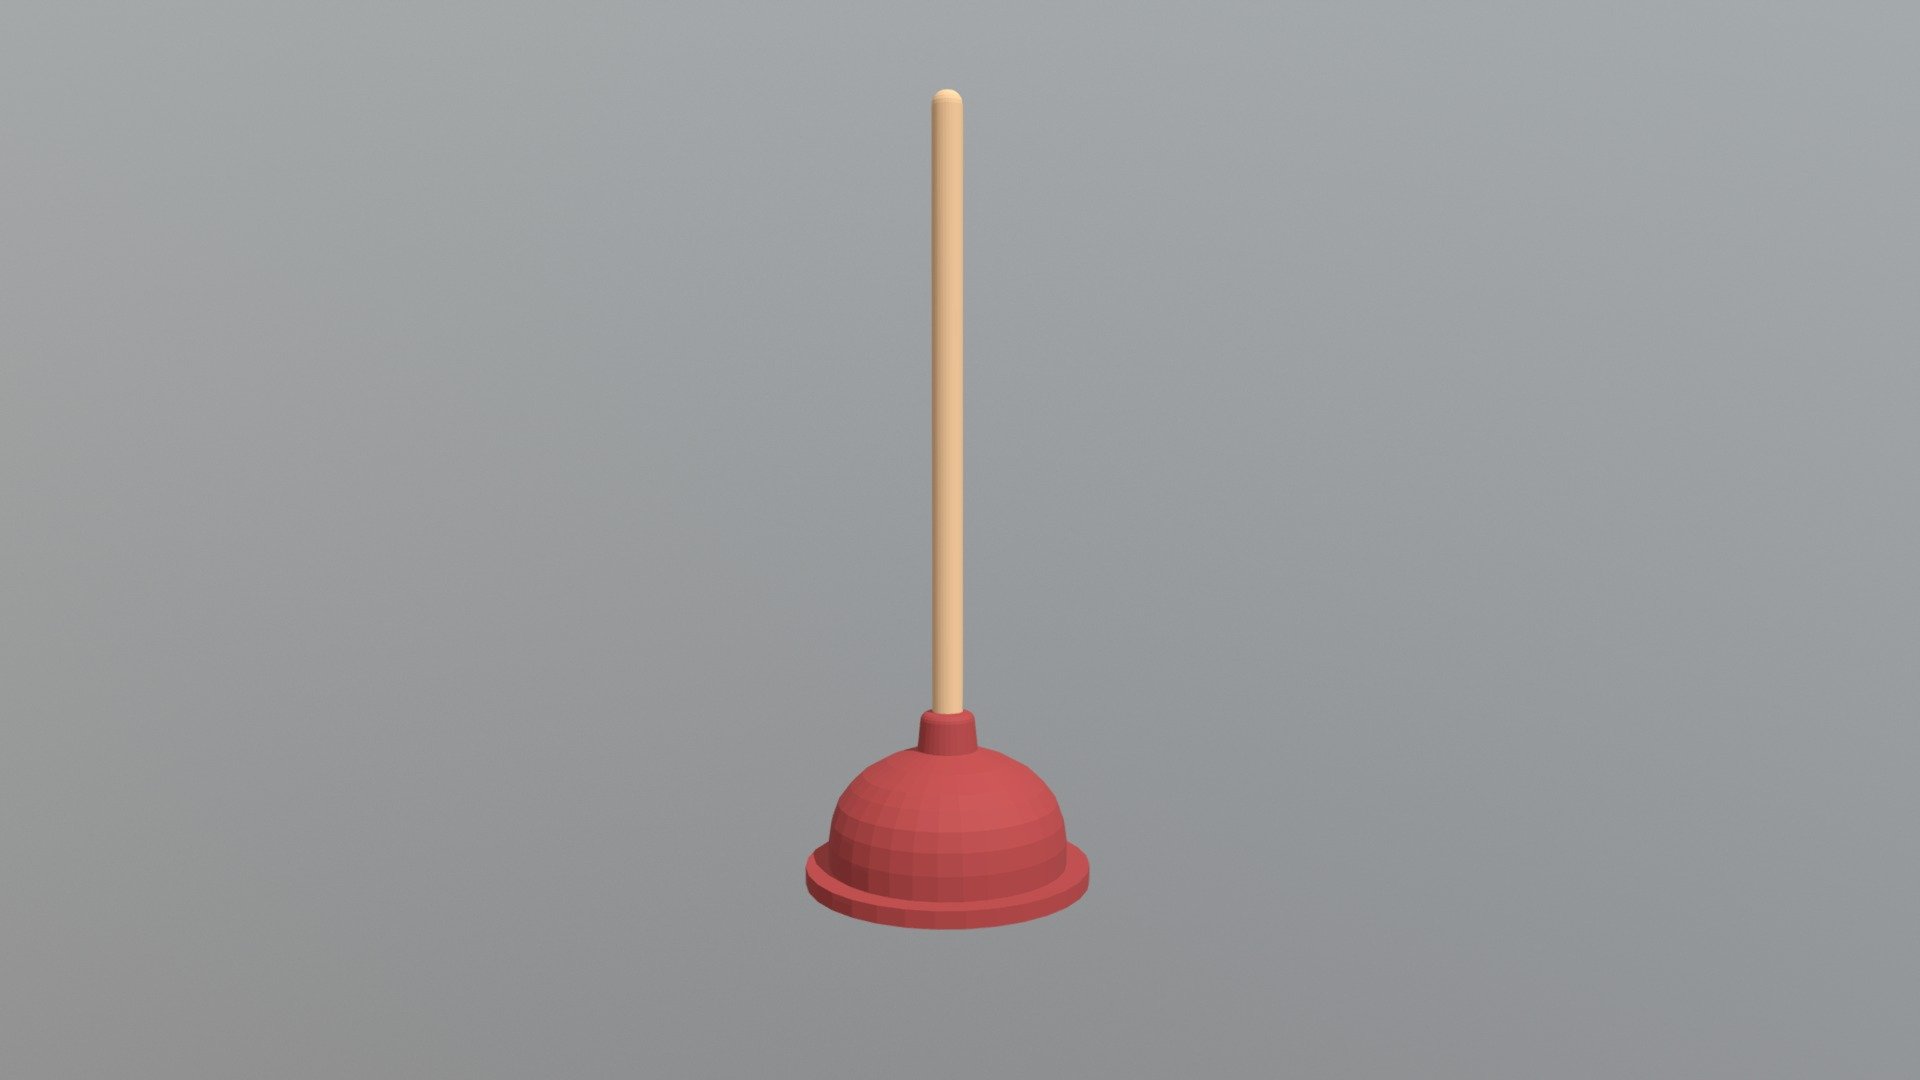 Apparently my insomnia inspires the creation of standard home appliances. 
Huh, well at least it's something productive, I guess ¯_(ツ)_/¯ - Plunger - 3D model by AnxiousMoon 3d model